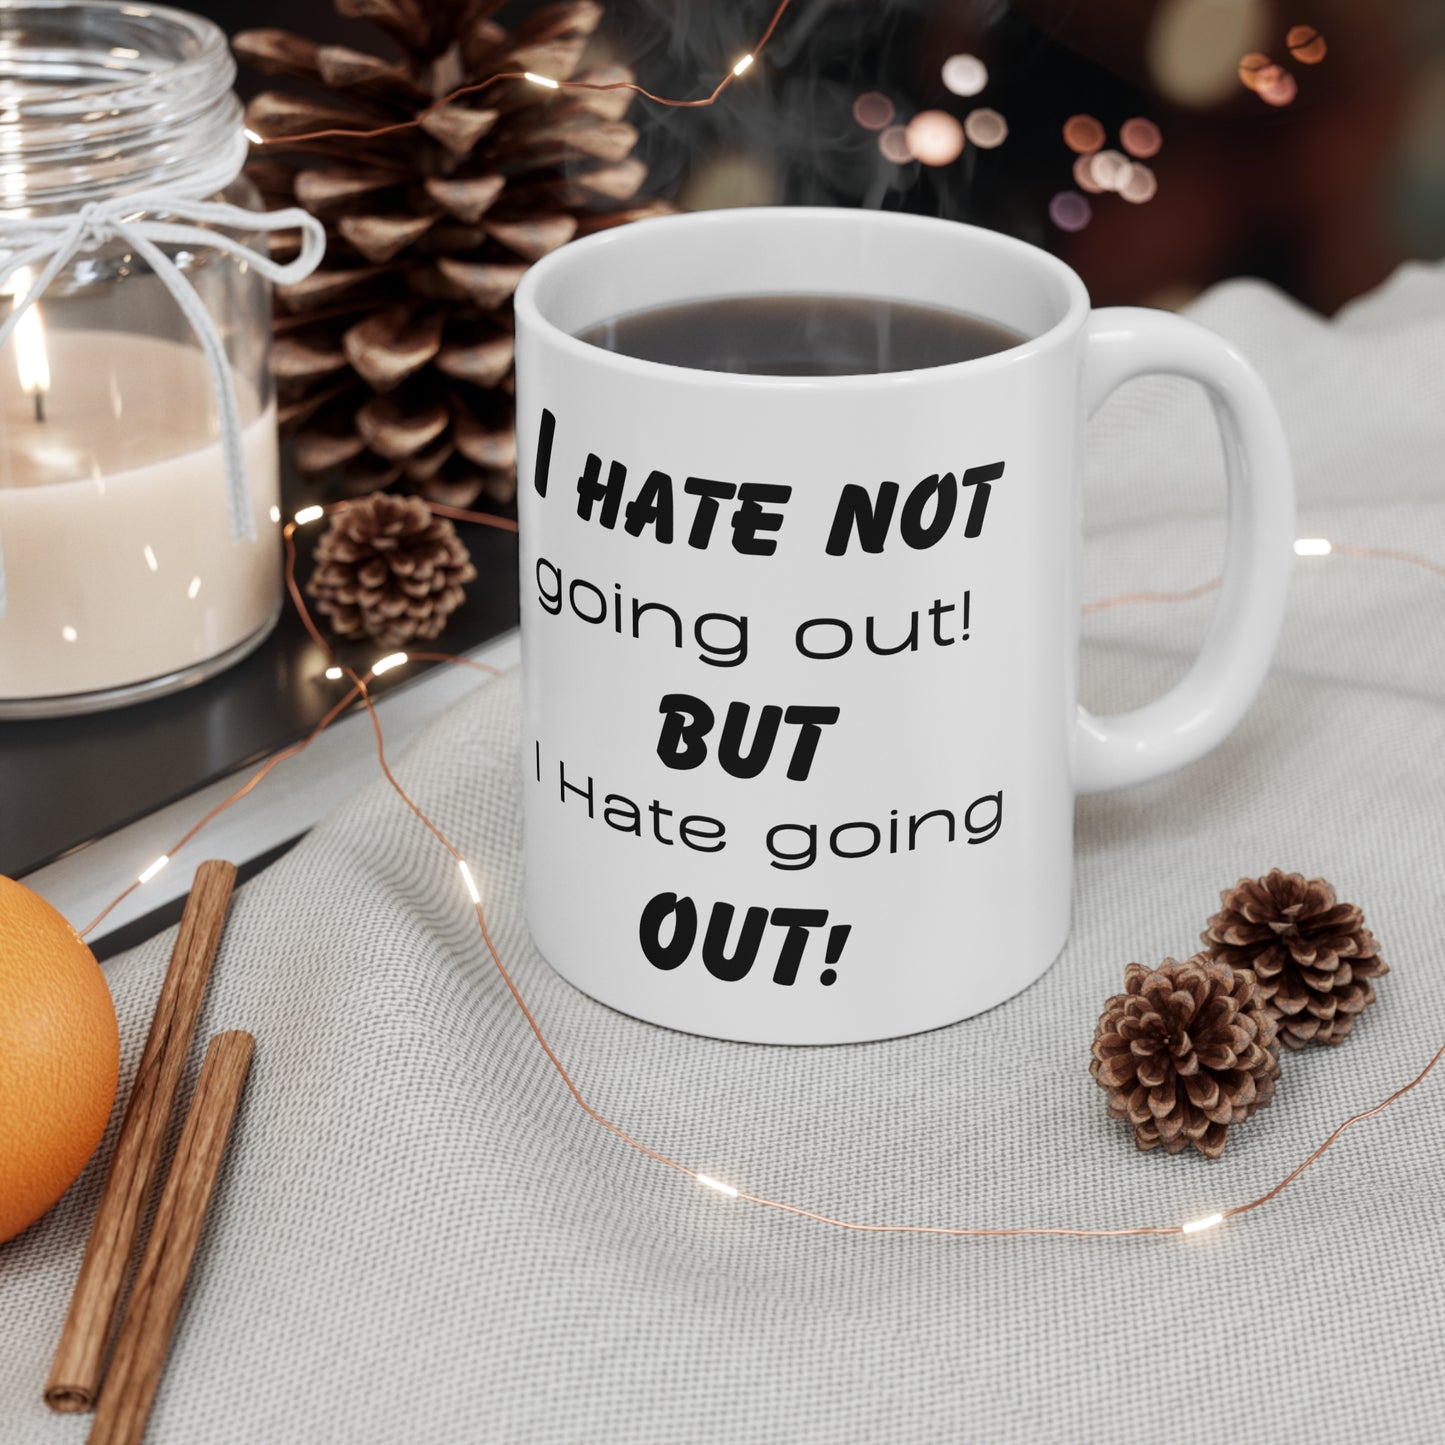 I hate not going, but I hate going out! Ceramic Coffee Cups, 11oz, 15oz